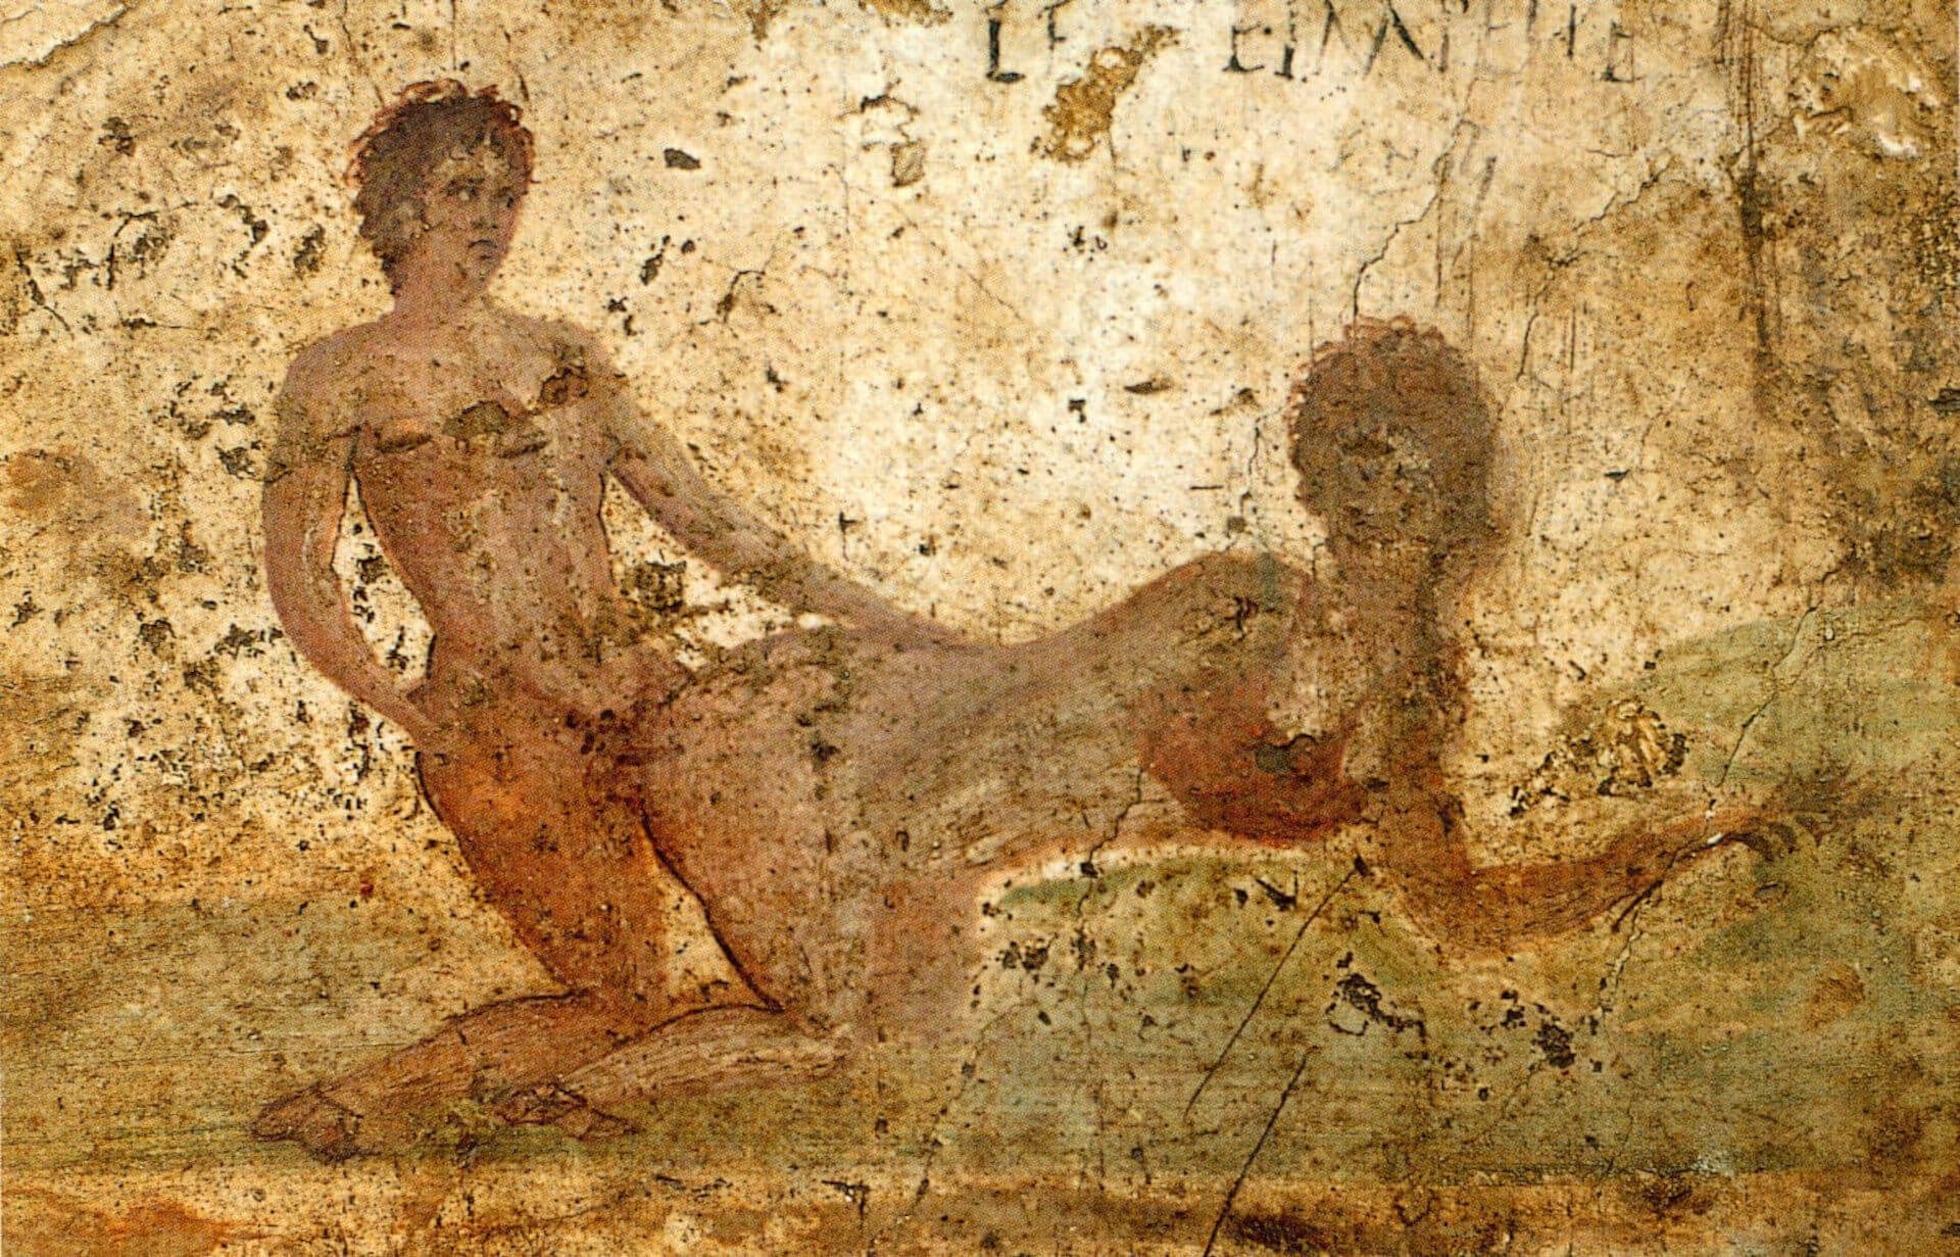 Anal Sex In Rome - Sex in Ancient Rome: a violent approach to lovemaking | Culture | EL PAÃS  English